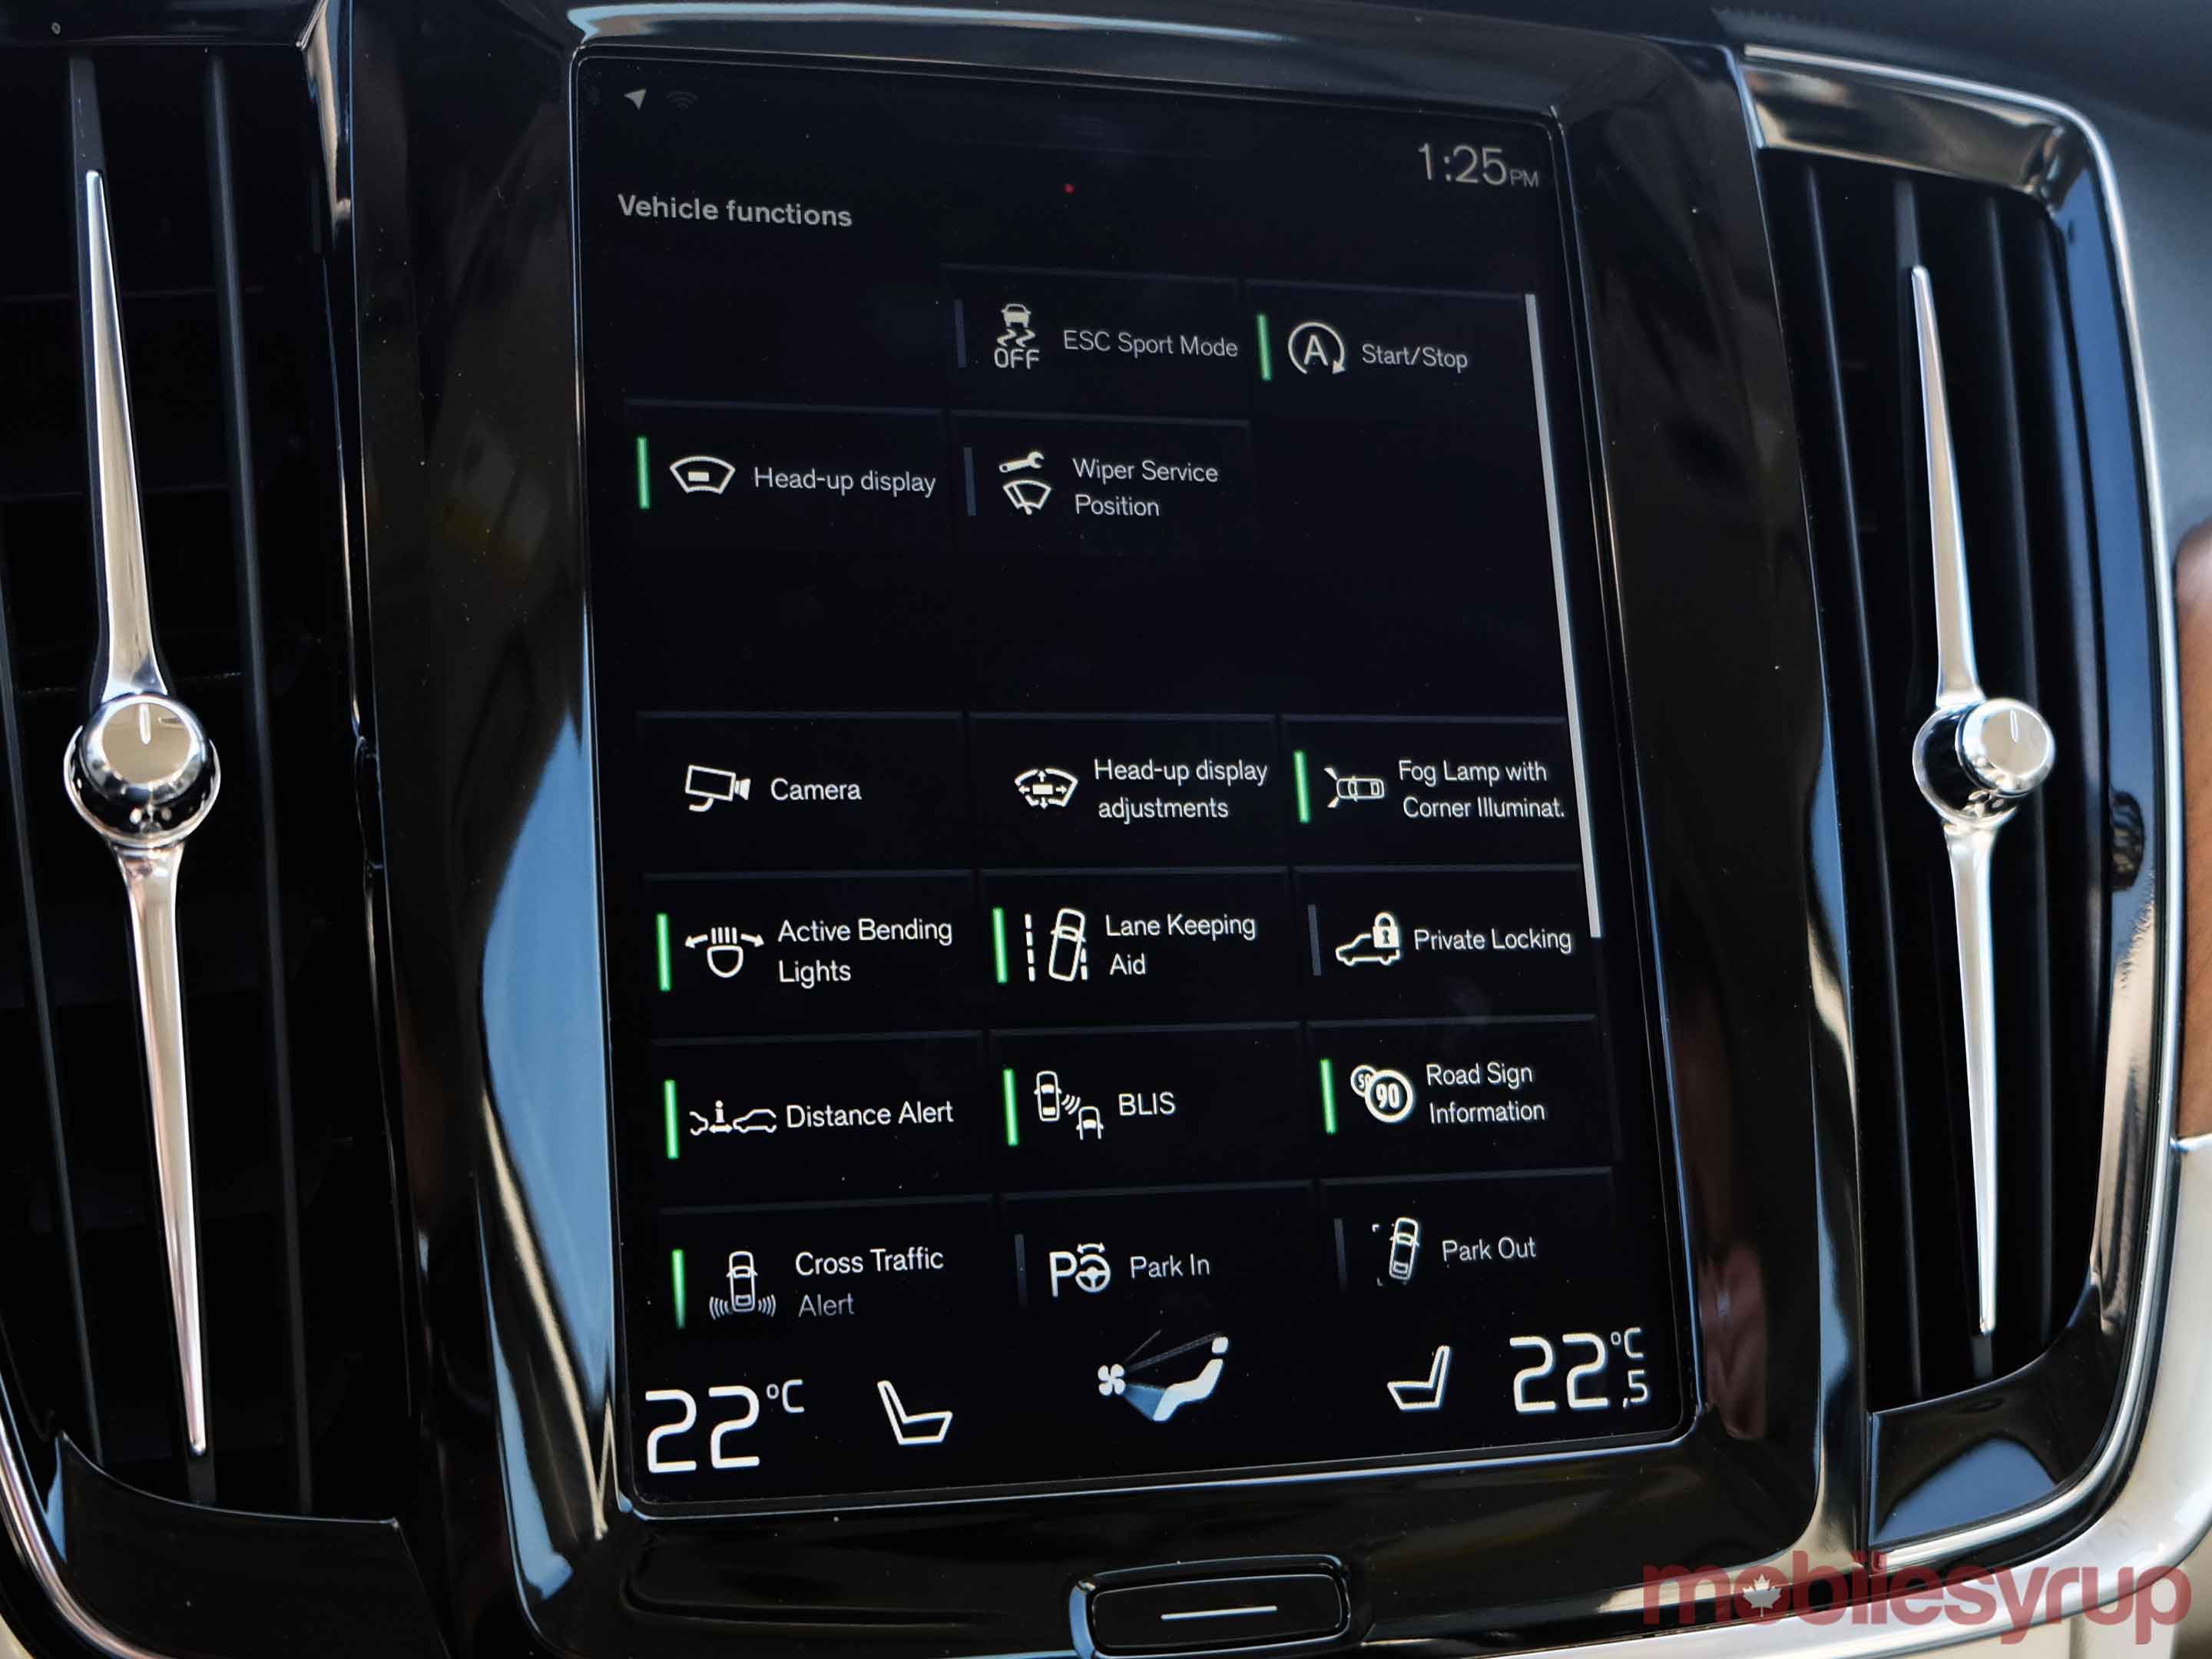 Volve S90 vehicle functions